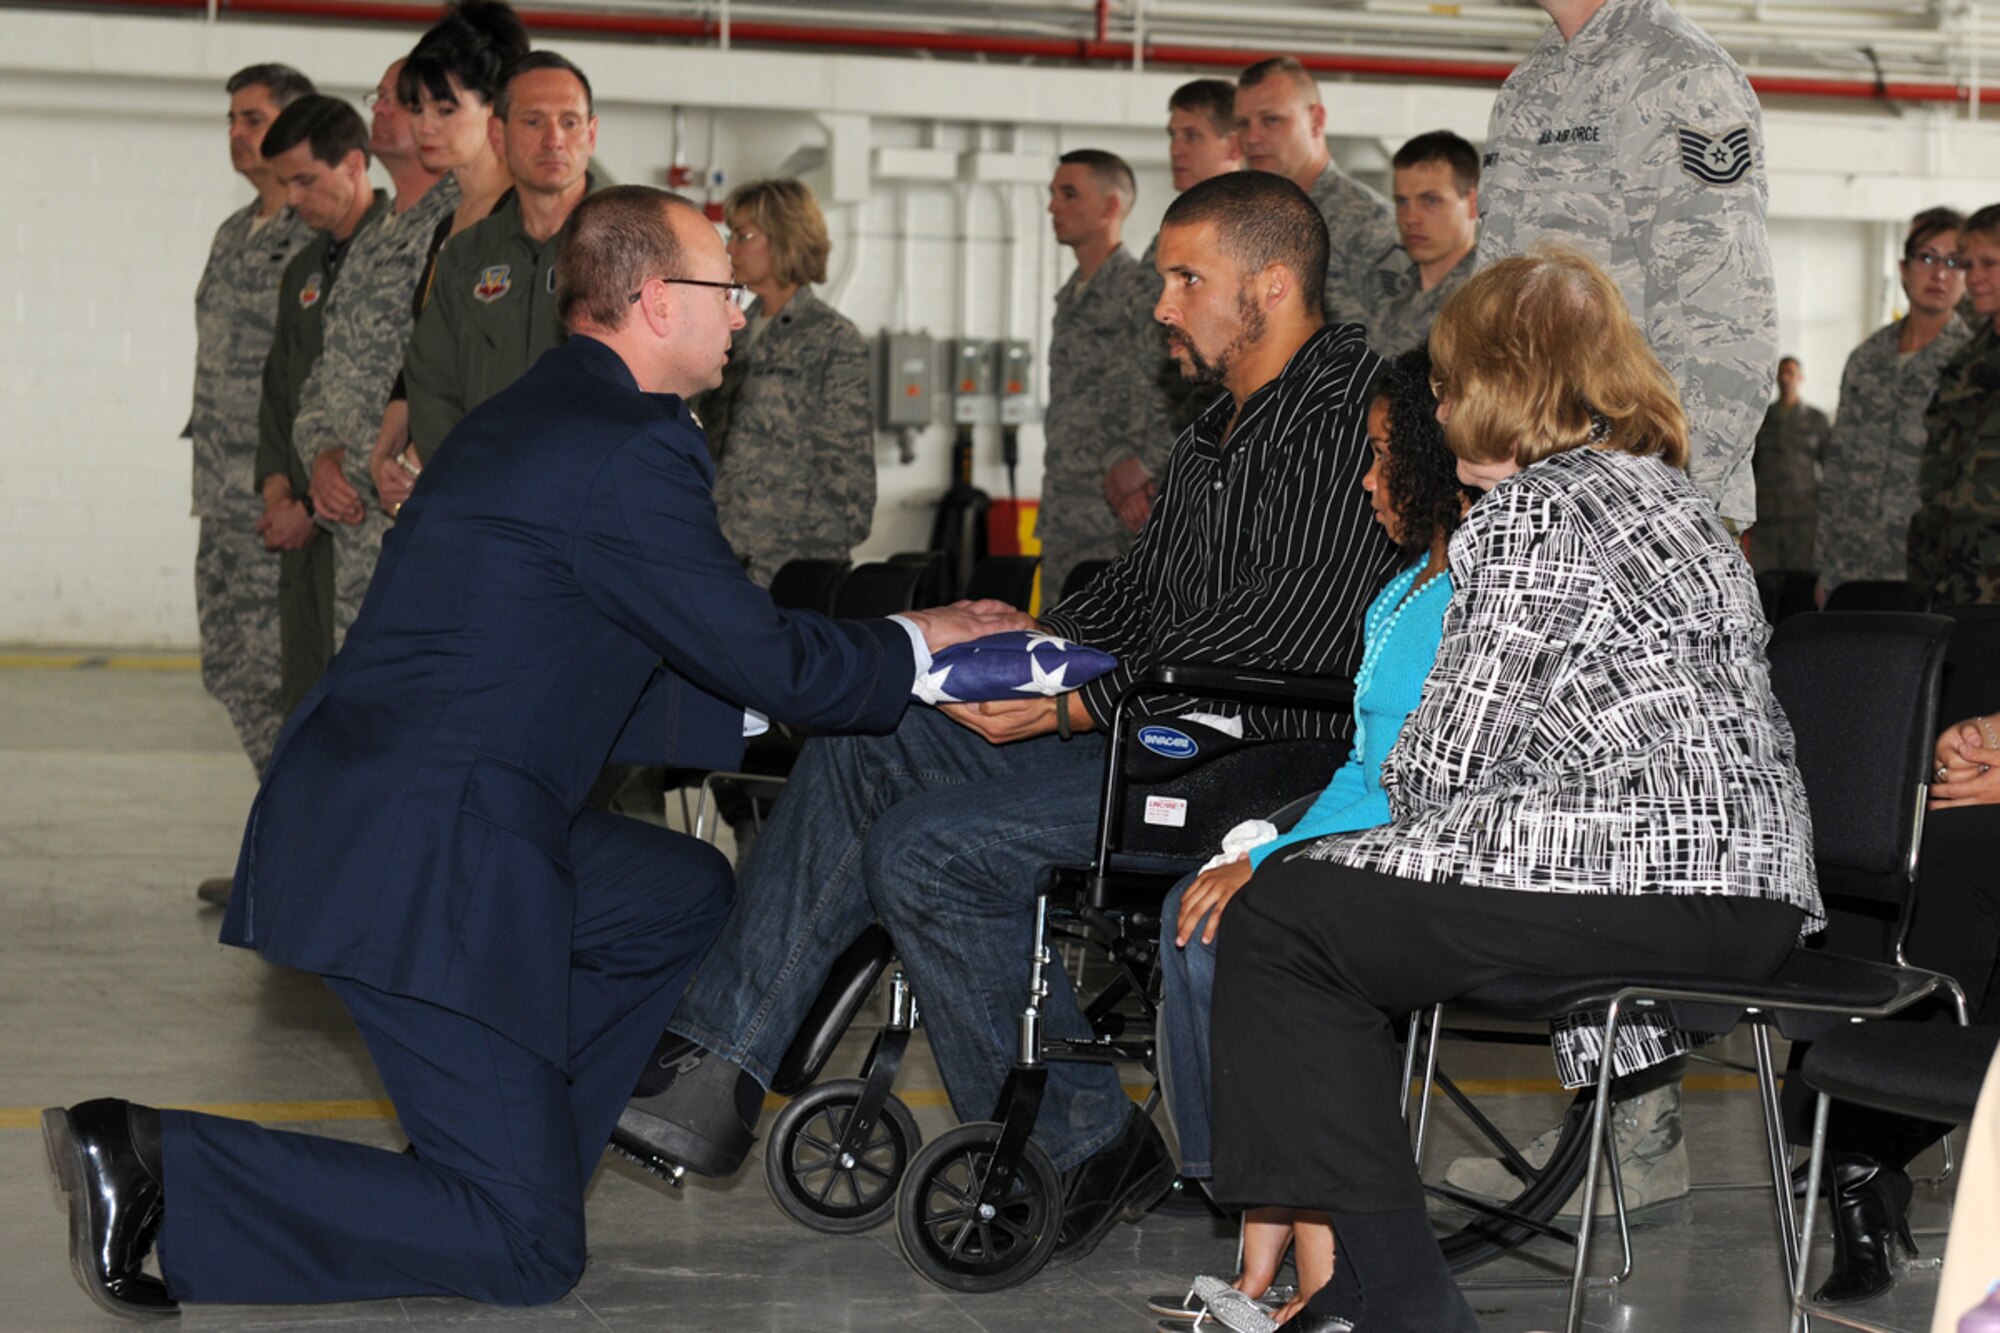 US Air Force Lt. Col. Michael F. Adamitis presents a flag to US Air Force Staff Sgt. Preston J. Cox for the loss of his fiancee, US Air Force Staff Sgt. Linda Monelavongsy, at a memorial service at Hancock Field in Syracuse, NY on 2 May 2010. The service was to celebrate the life of US Air Force Staff Sgt. Linda Monelavongsy who passed away in a motorcycle accident on 21 April 2010. (US Air Force photo by Staff Sgt. James Faso/Released)